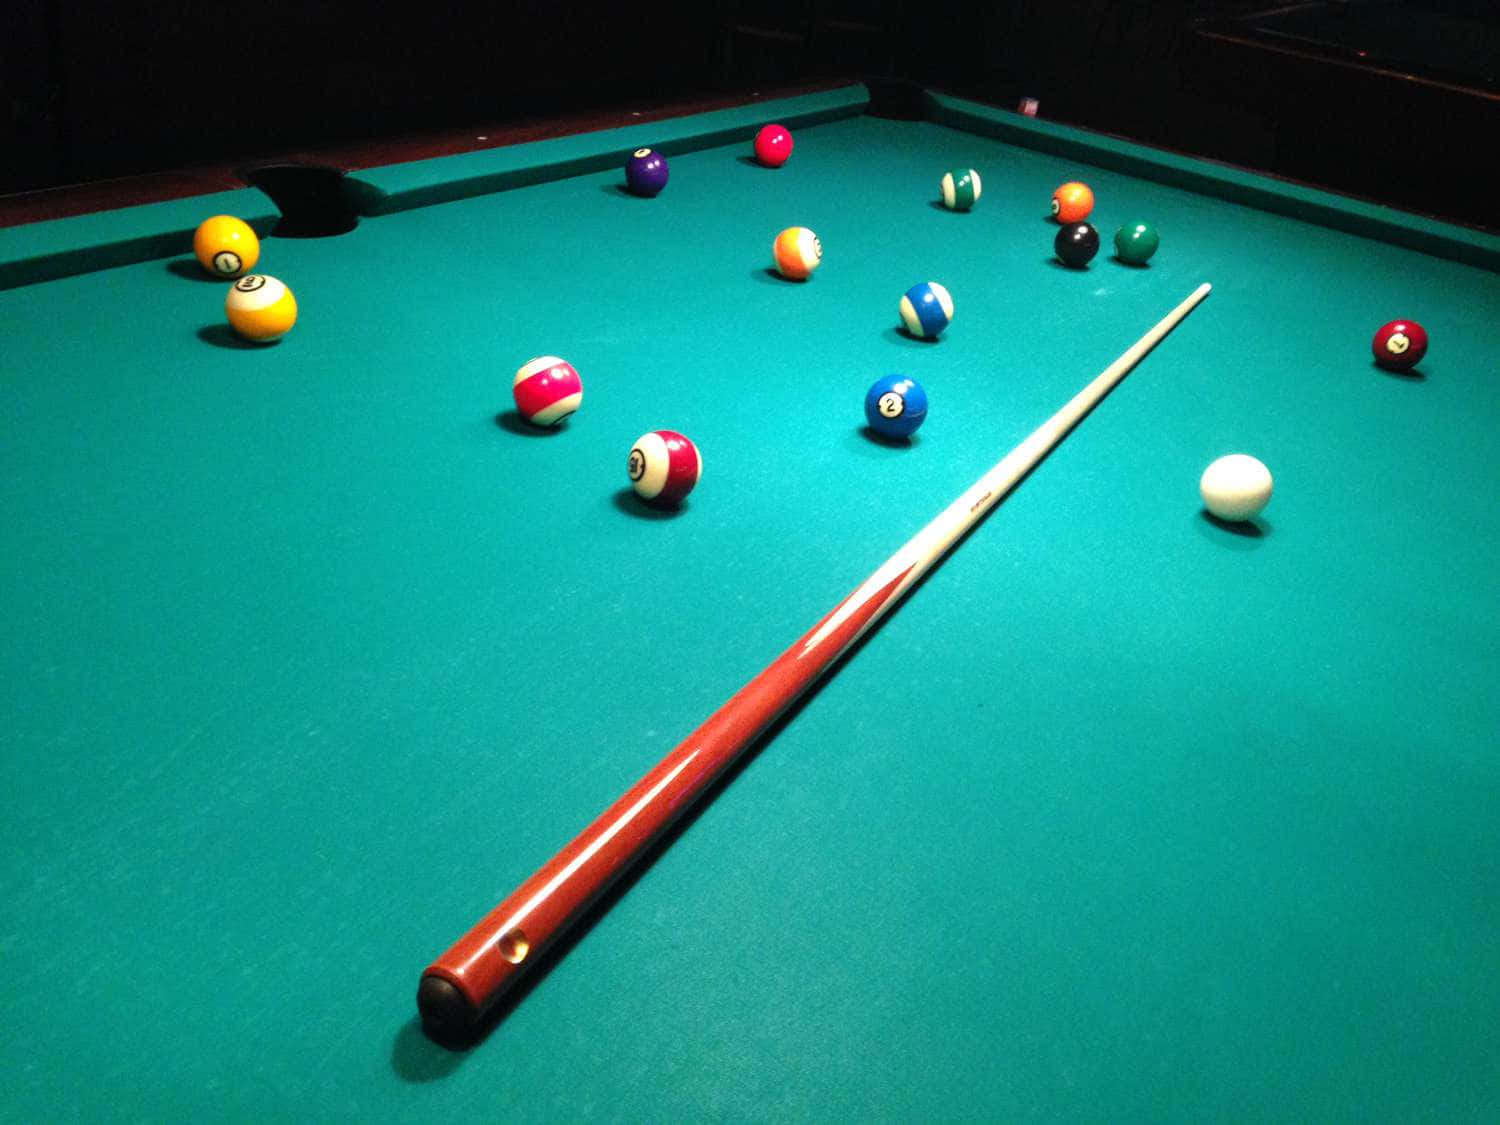 A Pool Table With Balls And Cues On It